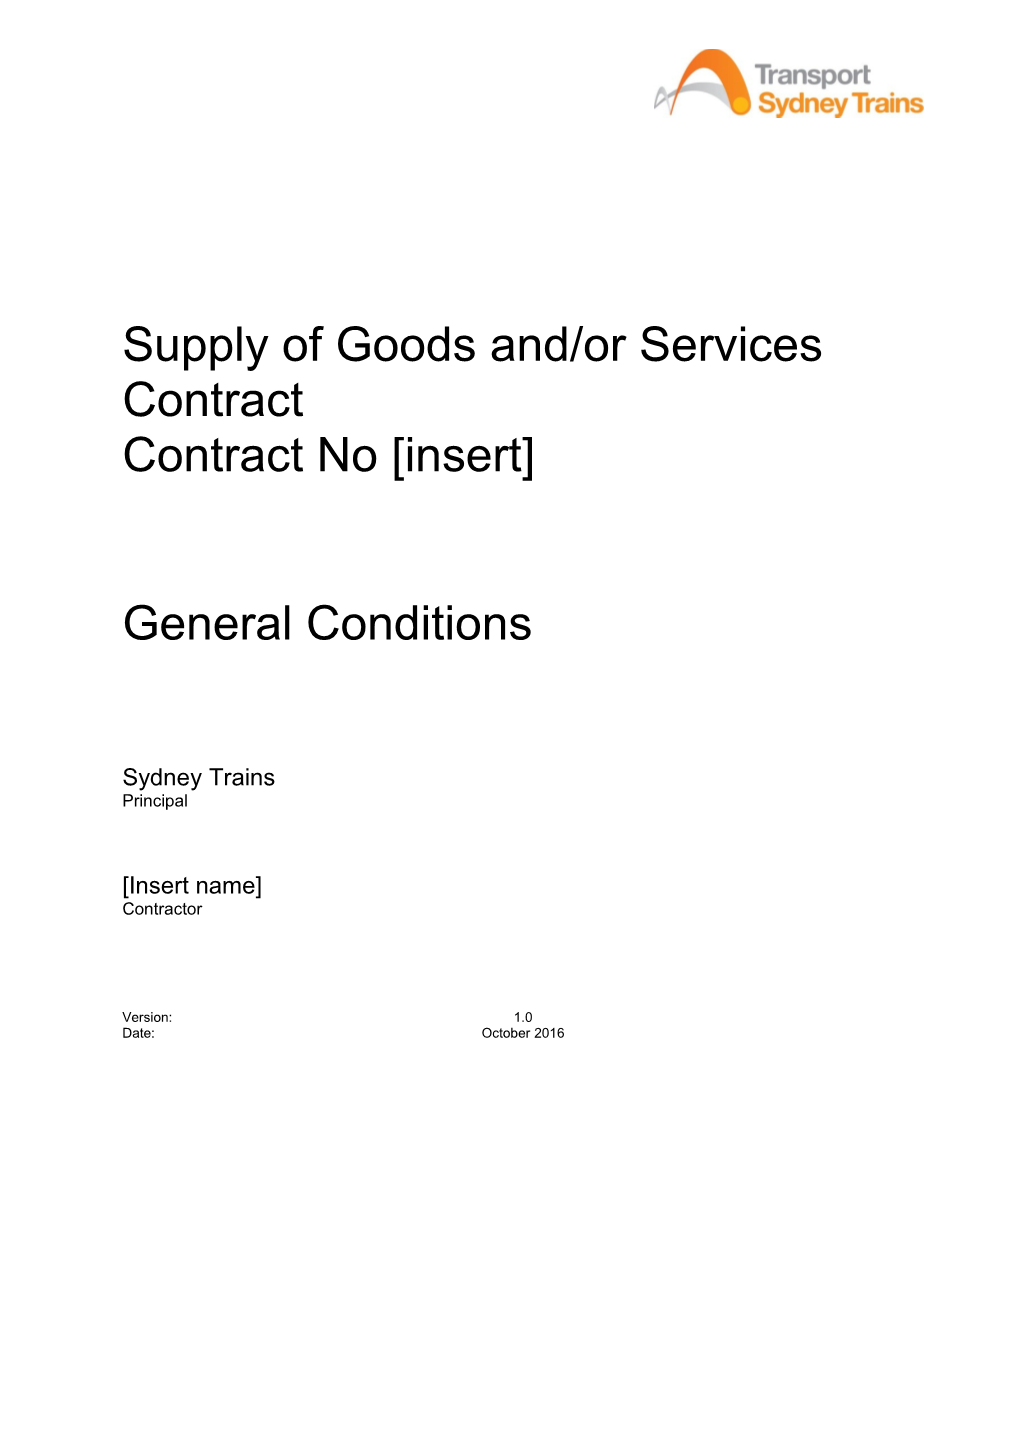 Supply of Goods And/Or Services Contract